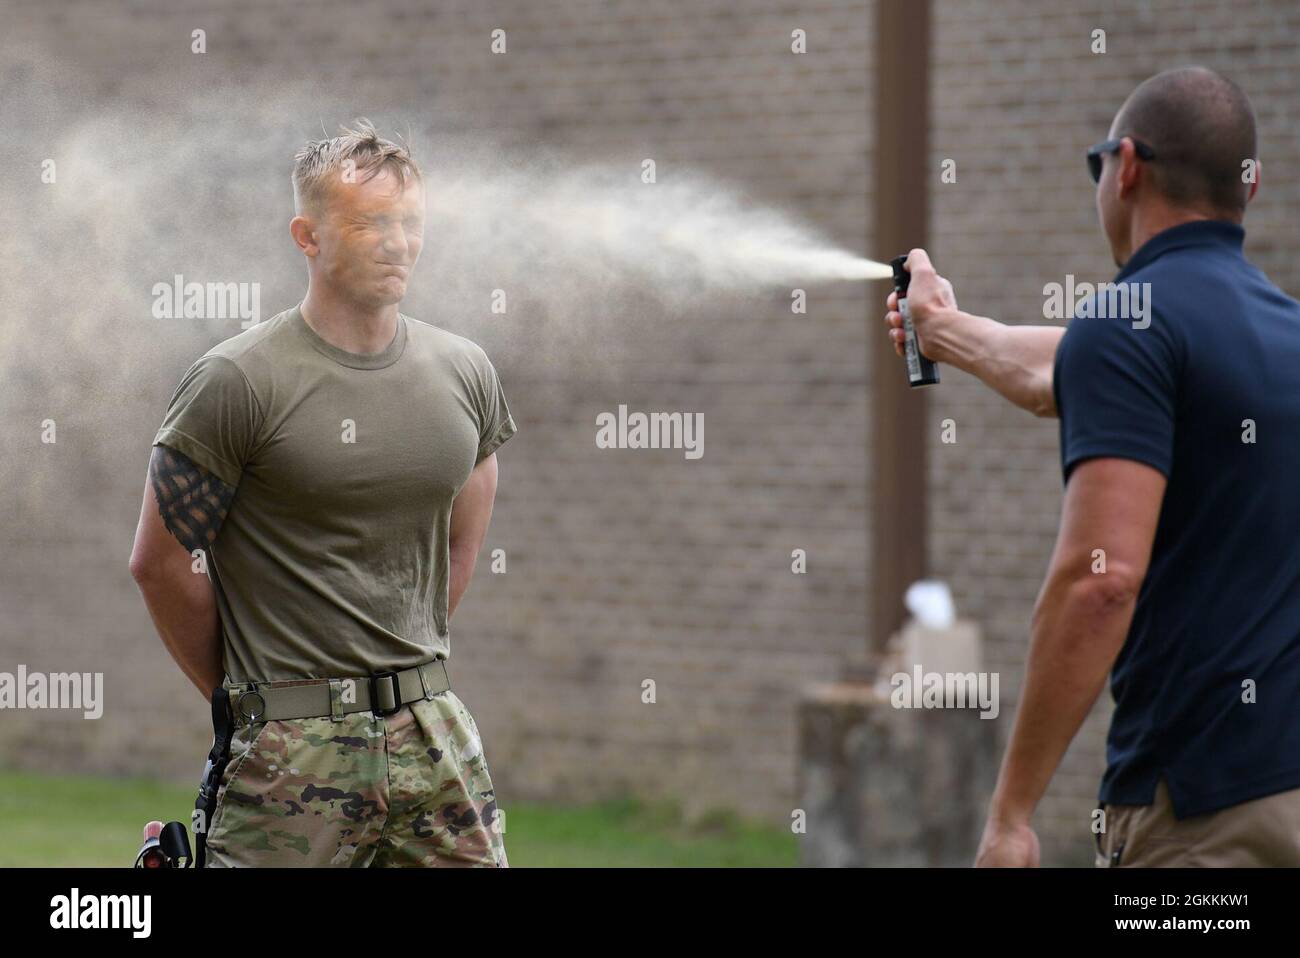 Justin Depew, 81st Security Forces Squadron unit trainer, sprays oleoresin capsicum on U.S. Air Force Airman 1st Class Levi Rainbolt, 81st SFS installation entry controller, as he participates in OC spray training at Keesler Air Force Base, Mississippi, May 18, 2021. The training is a required one-time exposure of the OC spray for all Security Forces members. Stock Photo